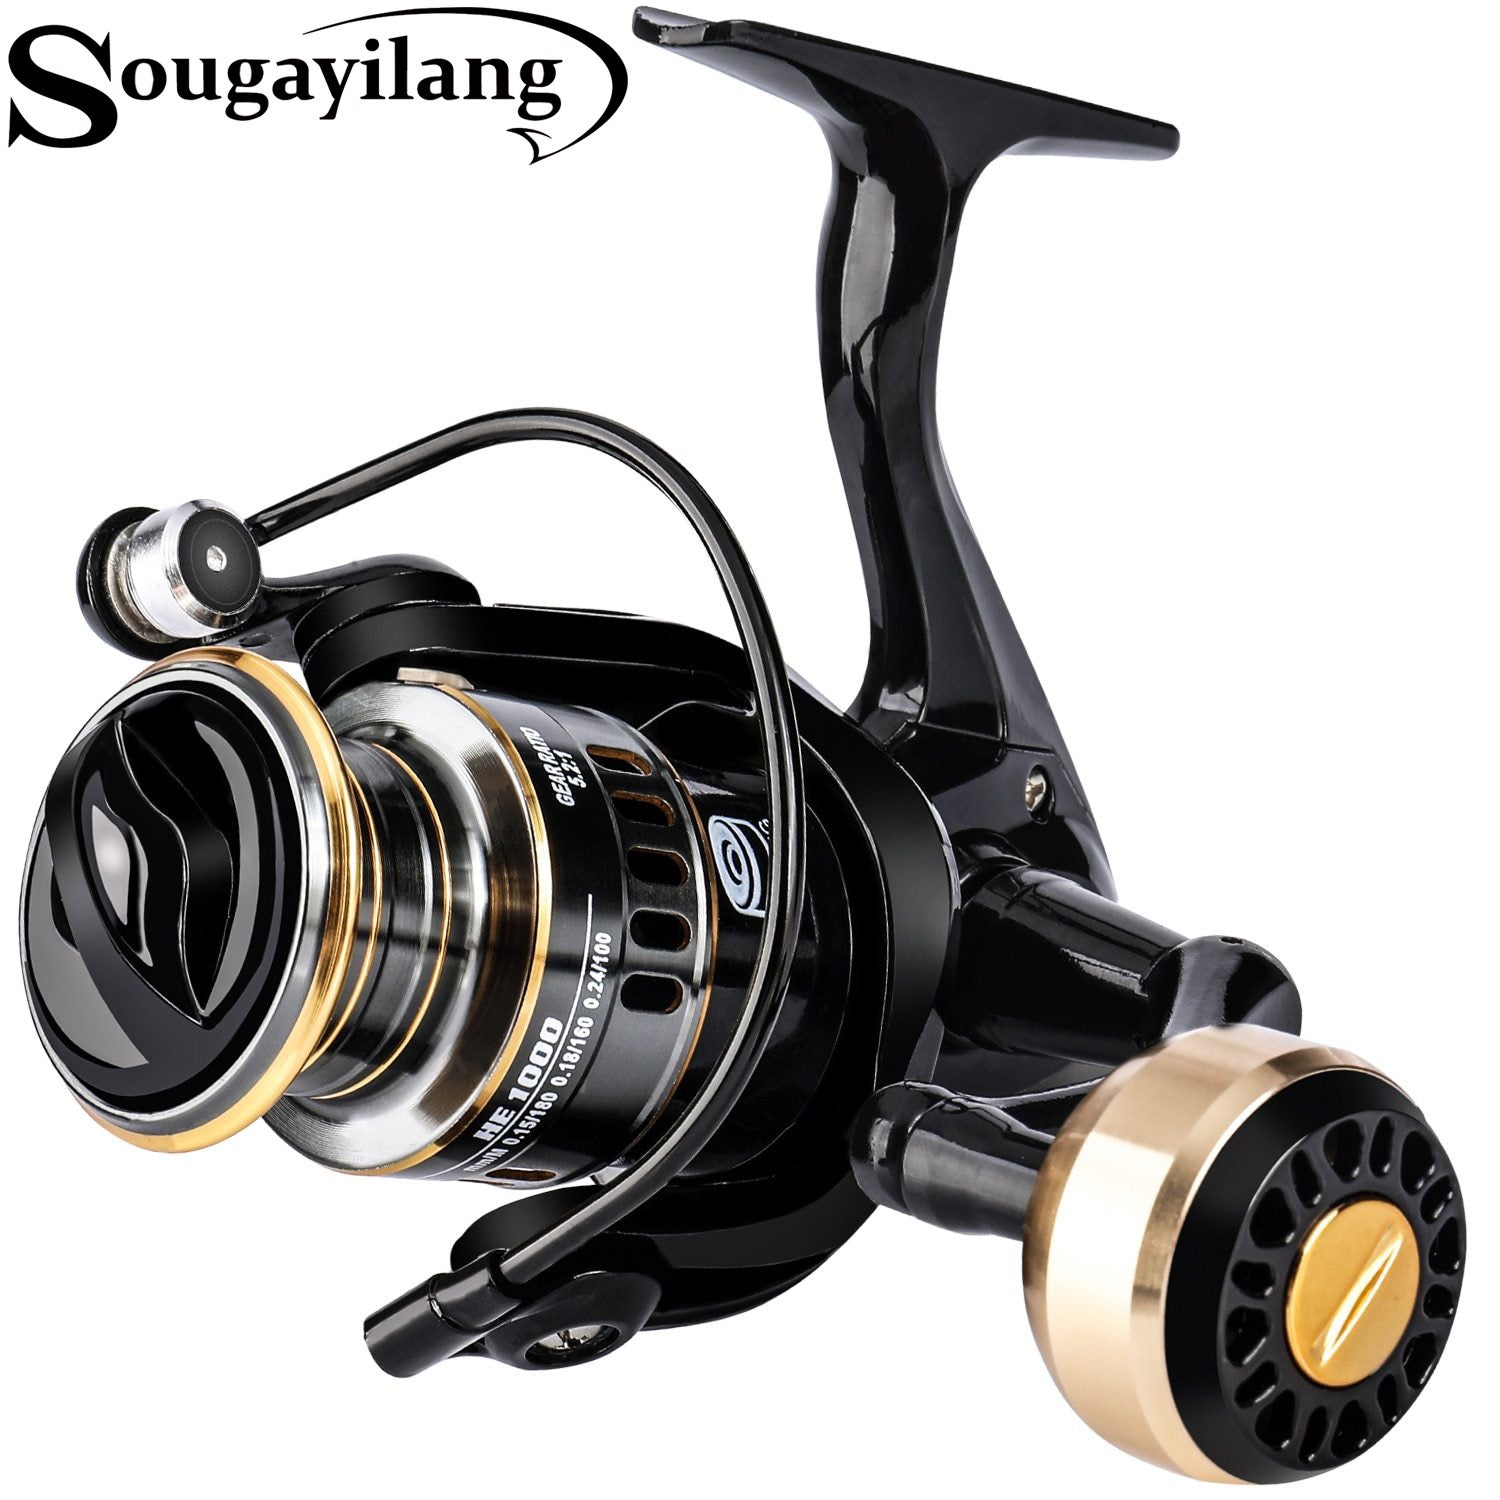 Sougayilang 5.2:1 Spinning Fishing Reels with Double Drag Machined and  Aluminum Spool for Carp Fishing